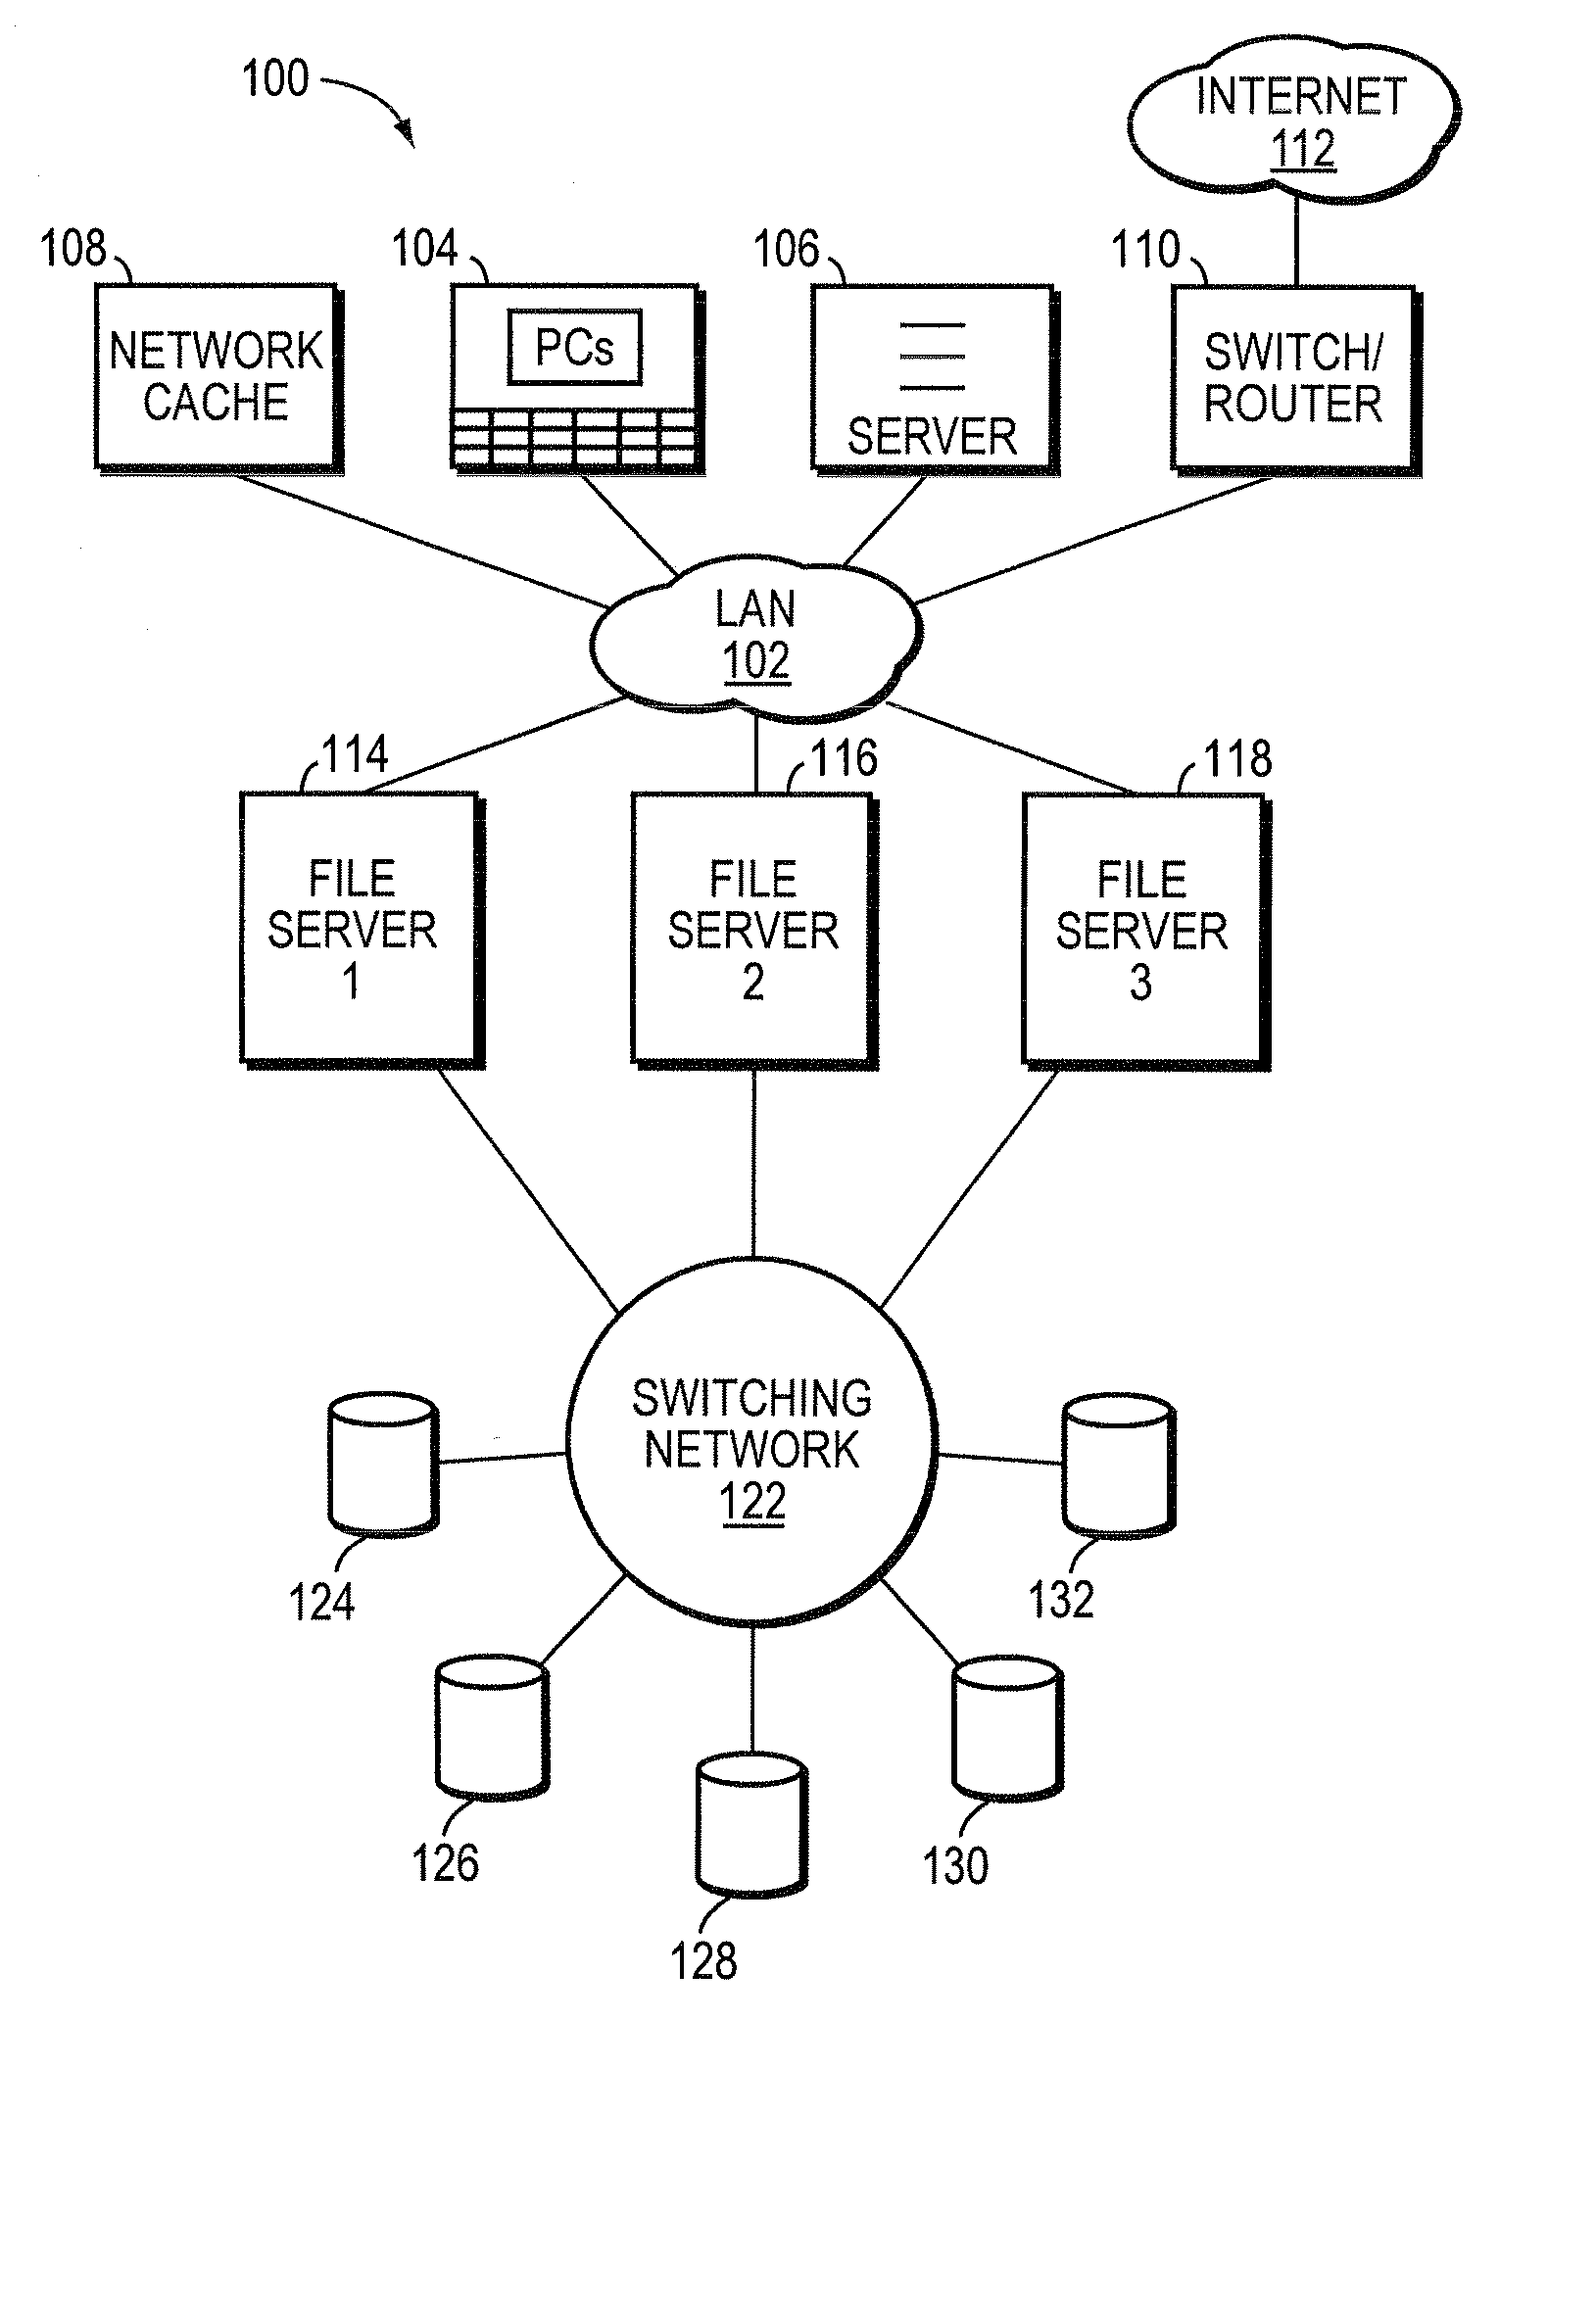 System and method for transferring volume ownership in networked storage